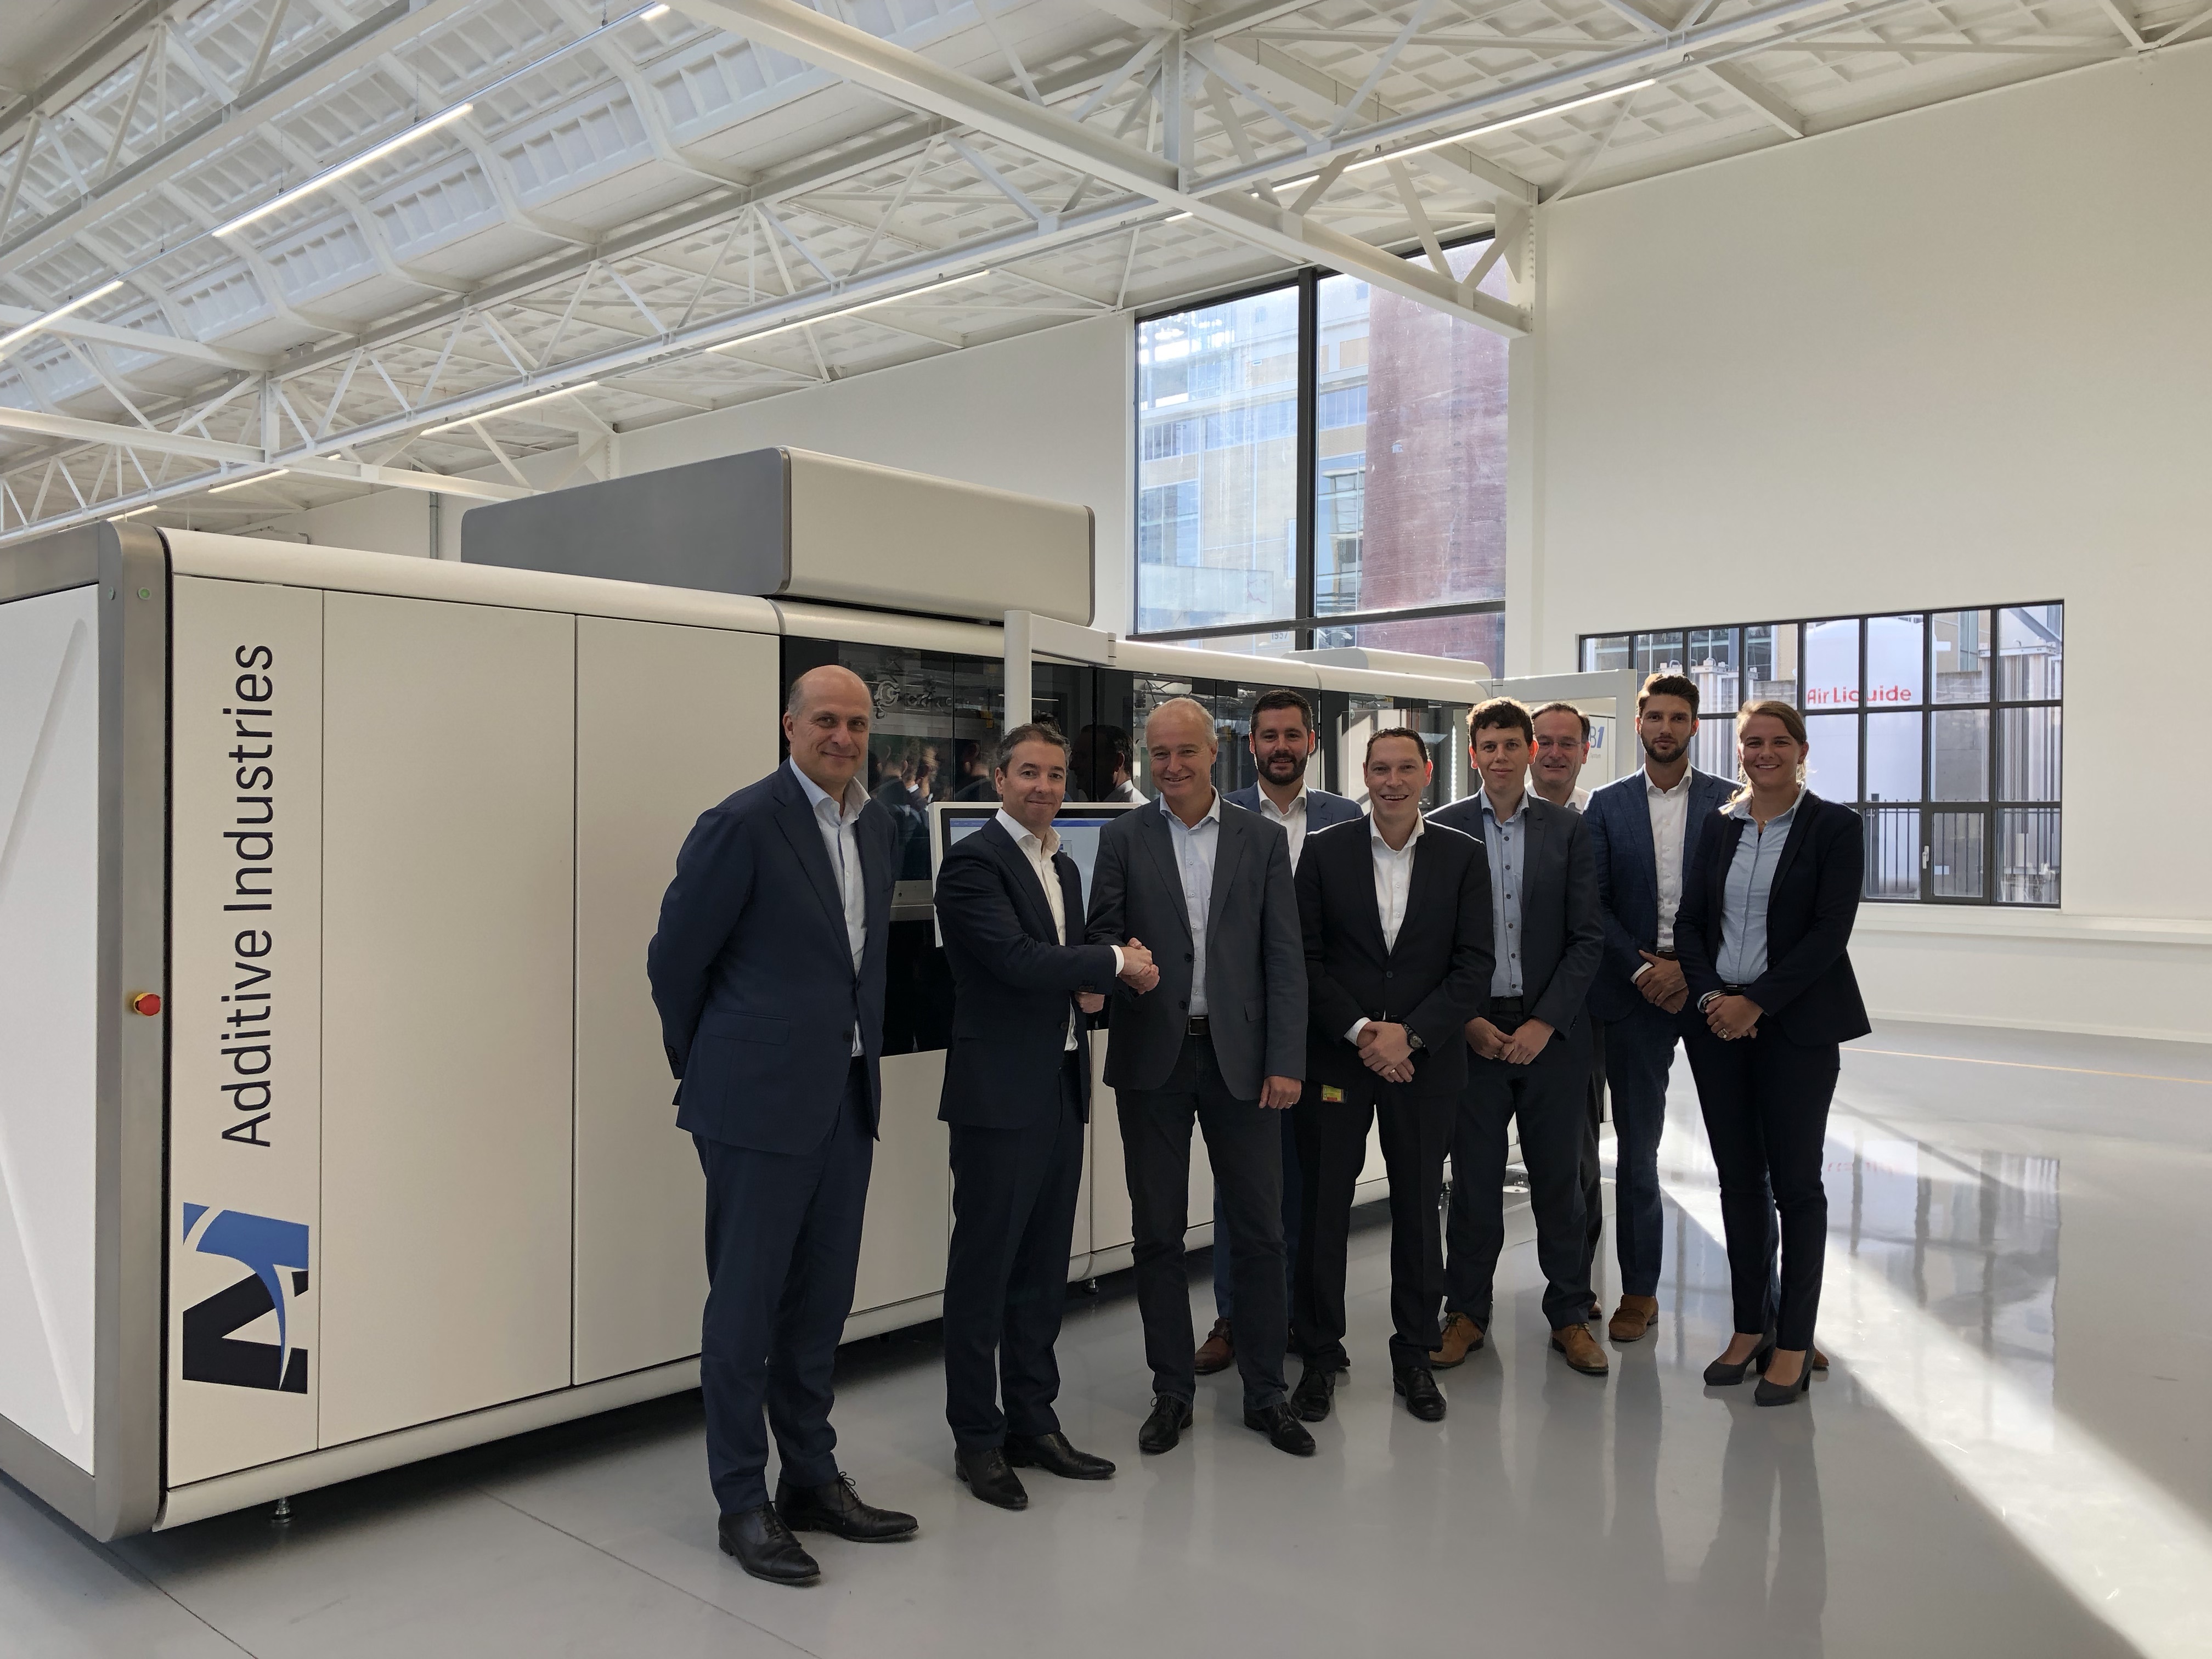 Air Liquide and Additive Industries have reportedly entered into partnership to develop additive manufacturing (AM).